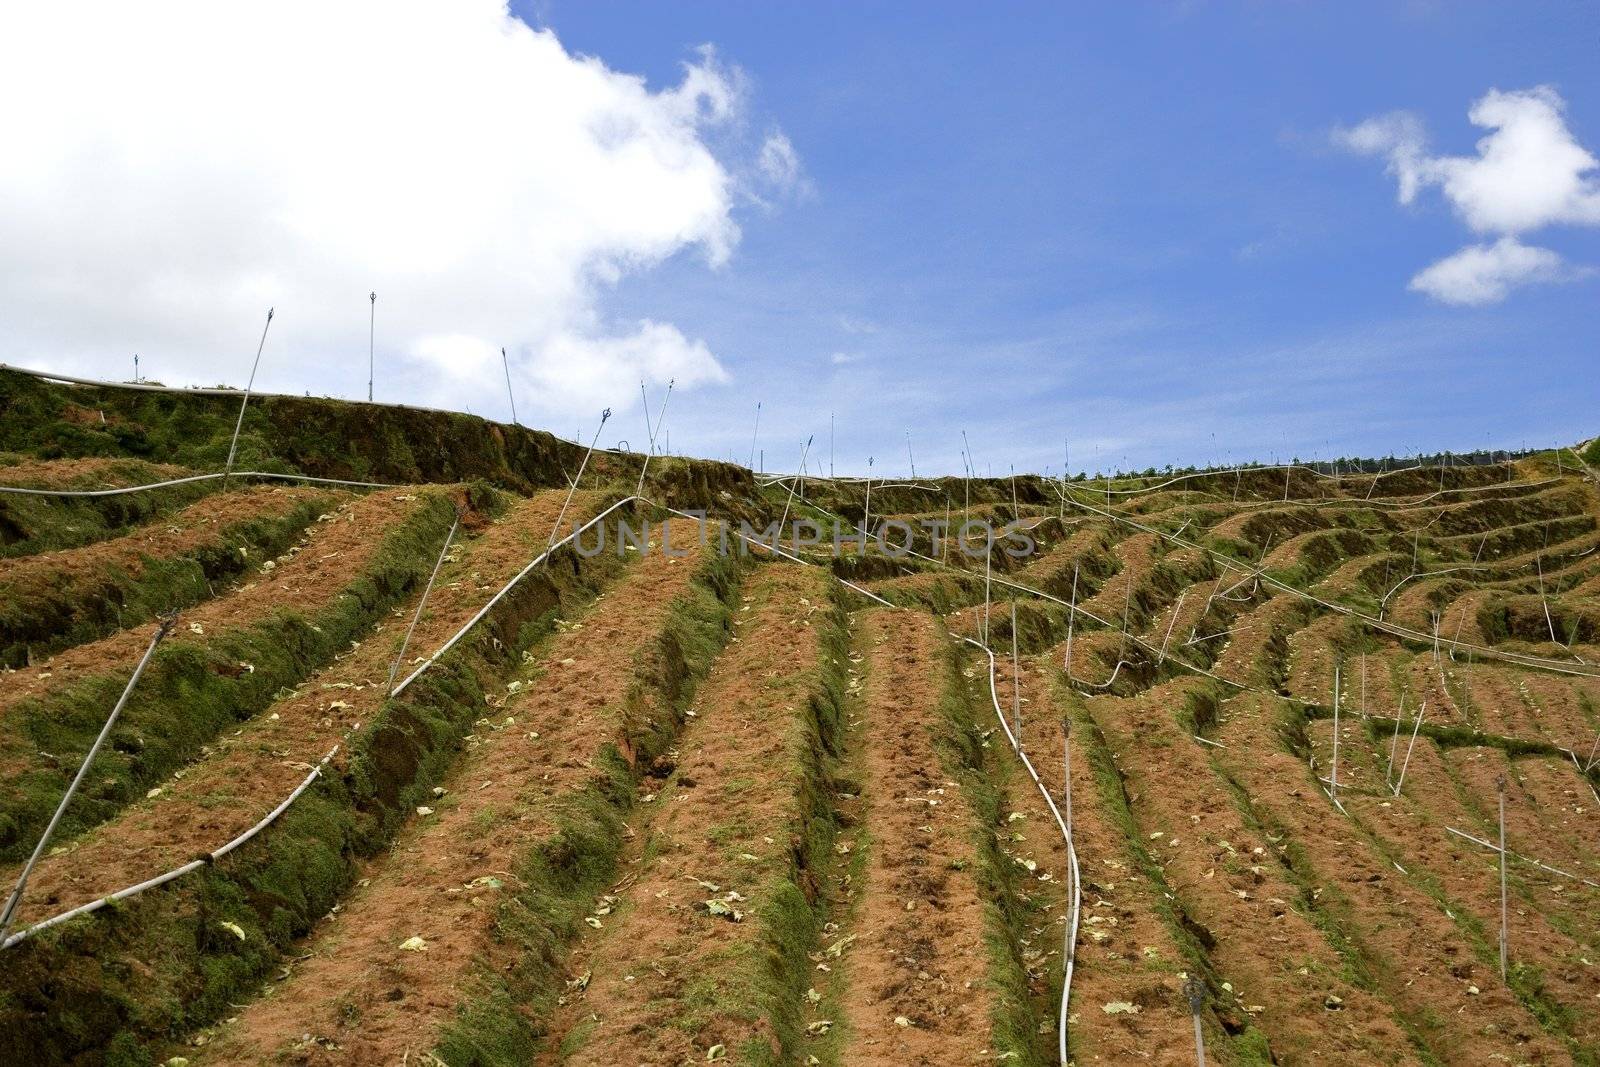 Landscape of a highland vegetable farm terrace at Cameron Highlands, Malaysia. This terrace is now barren after harvesting of vegetables.